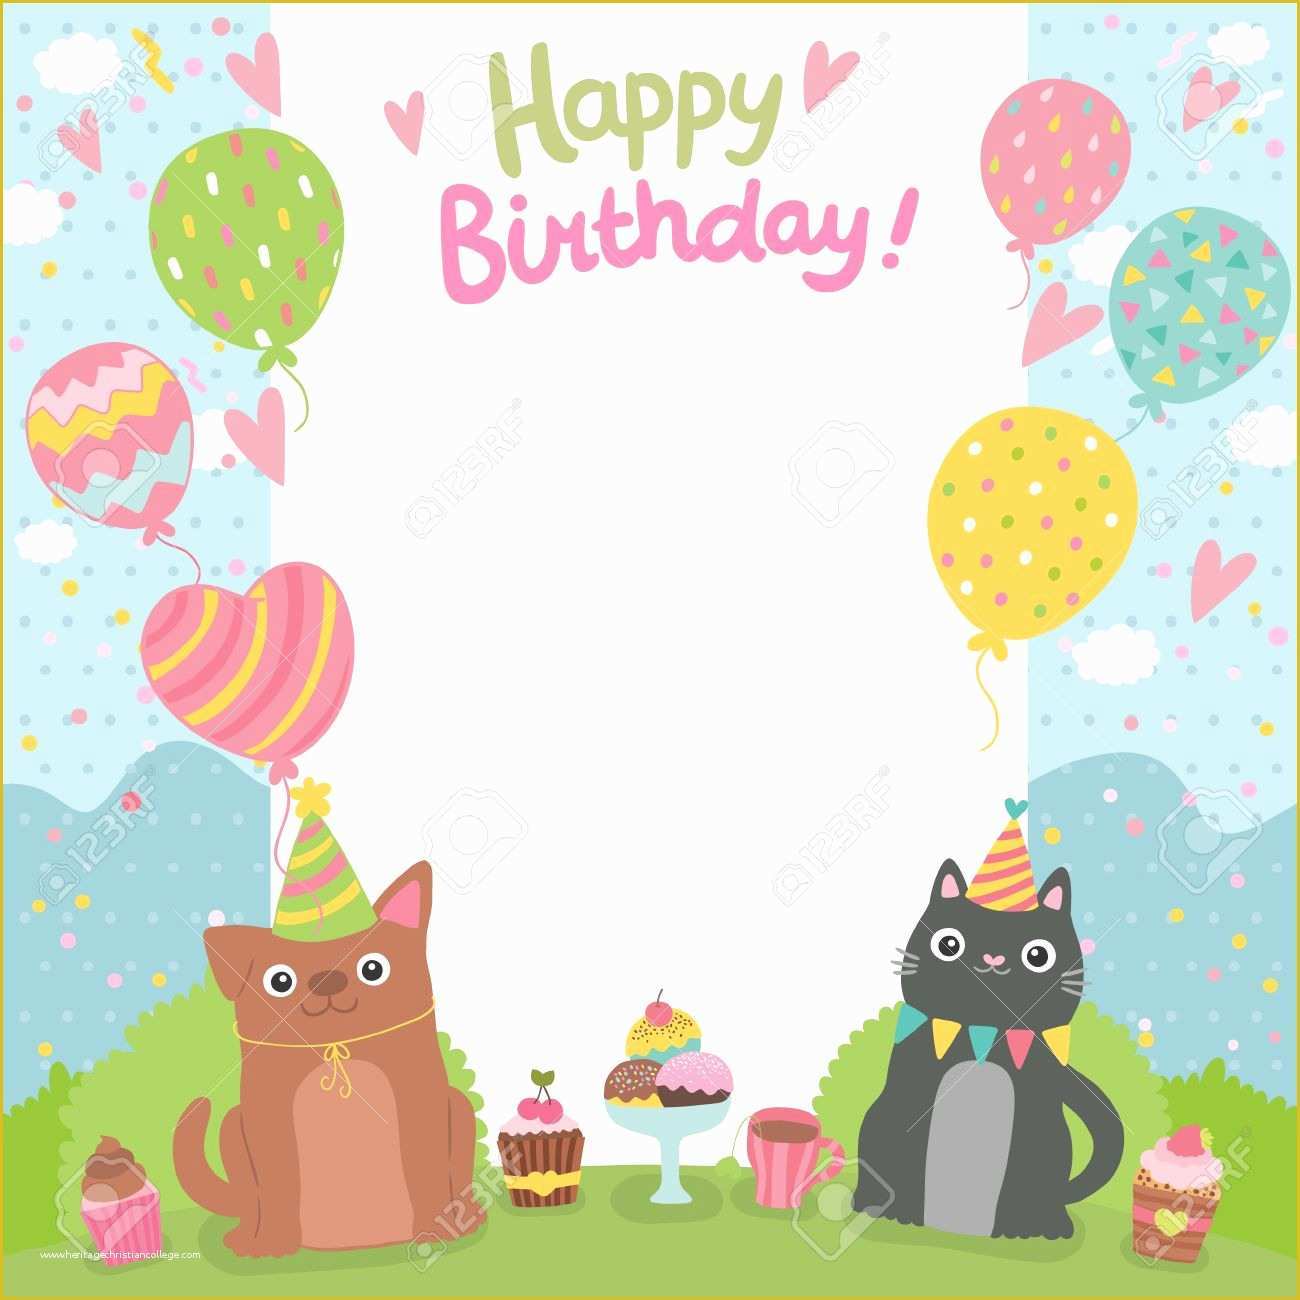 Free Photo Birthday Card Template Of Happy Birthday Card Template Regarding Happy Birthday Card